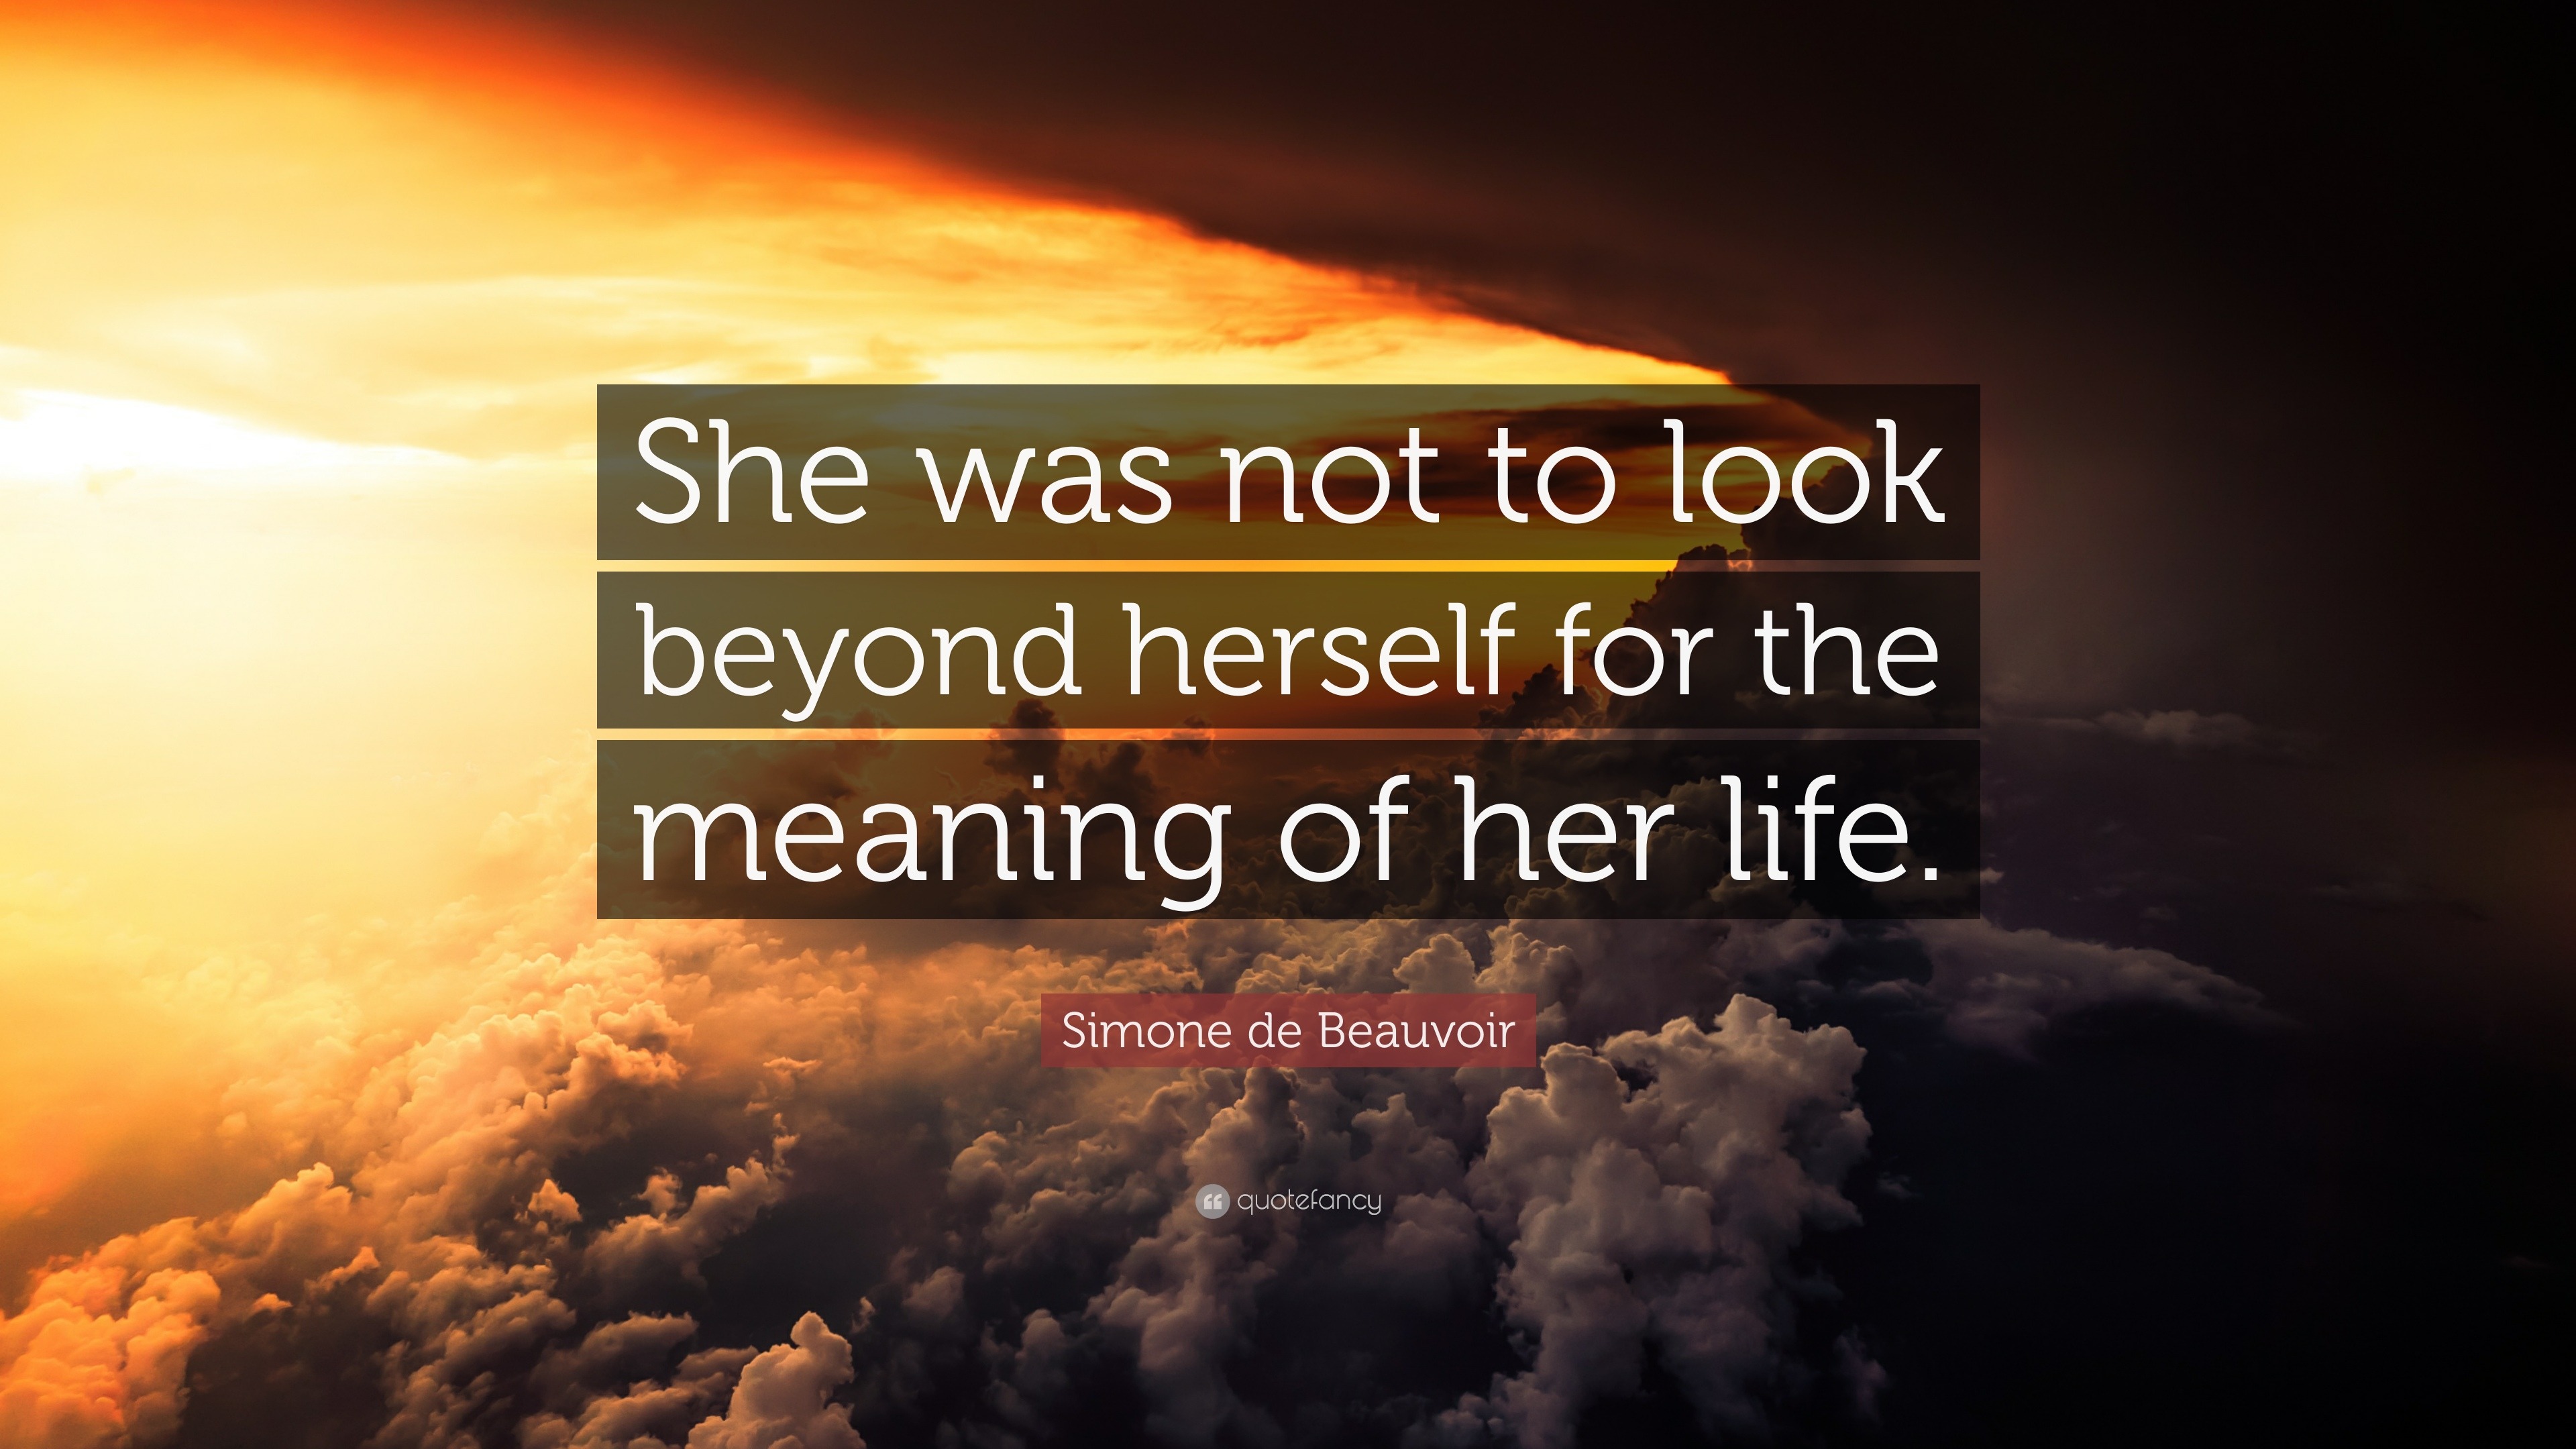 Simone de Beauvoir Quote: “She was not to look beyond herself for the ...